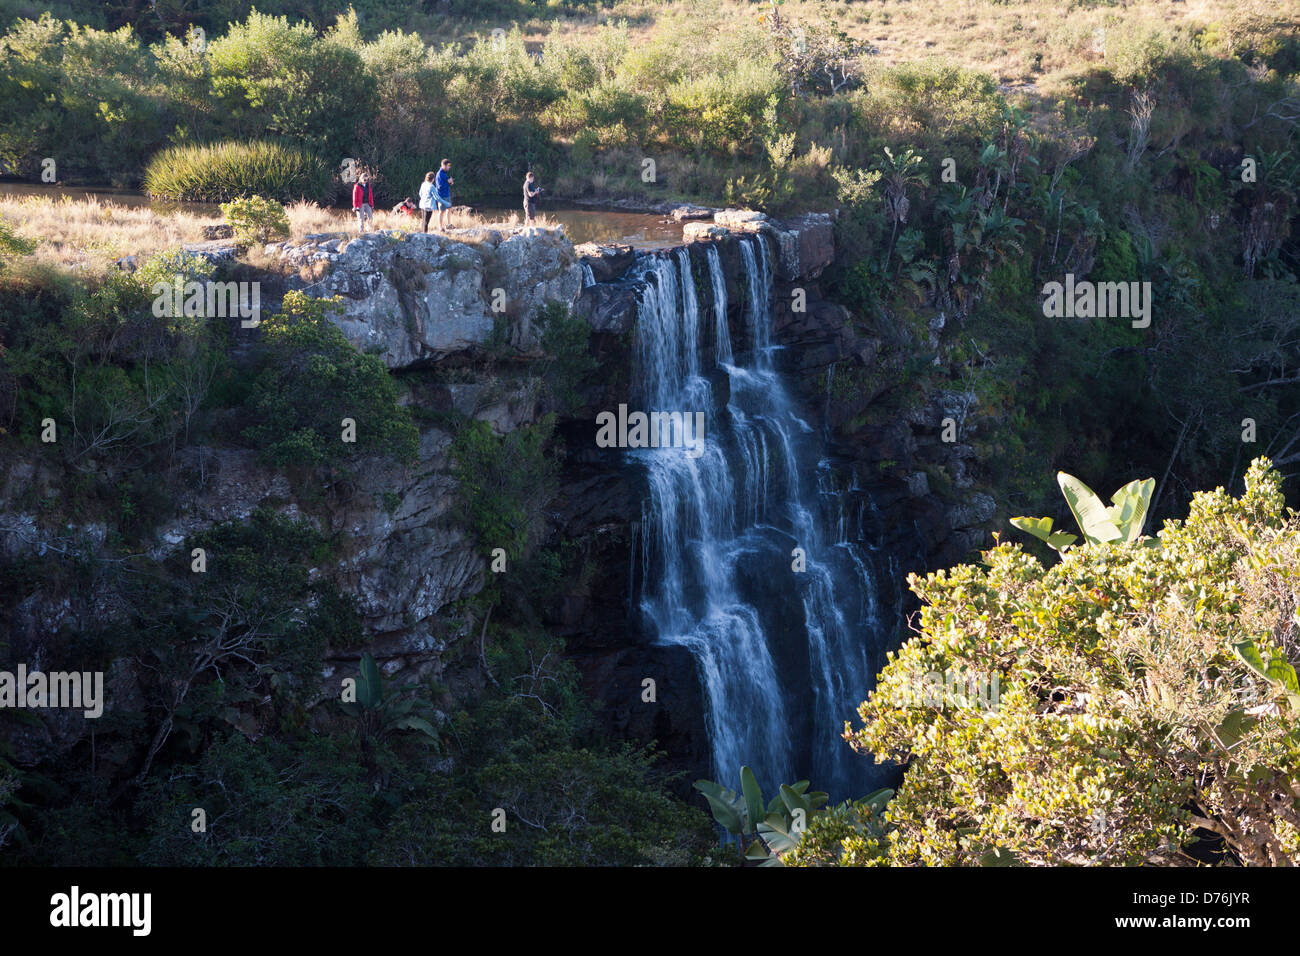 Waterfall at Wild Coast, Mbotyi, Eastern Cap, South Africa Stock Photo